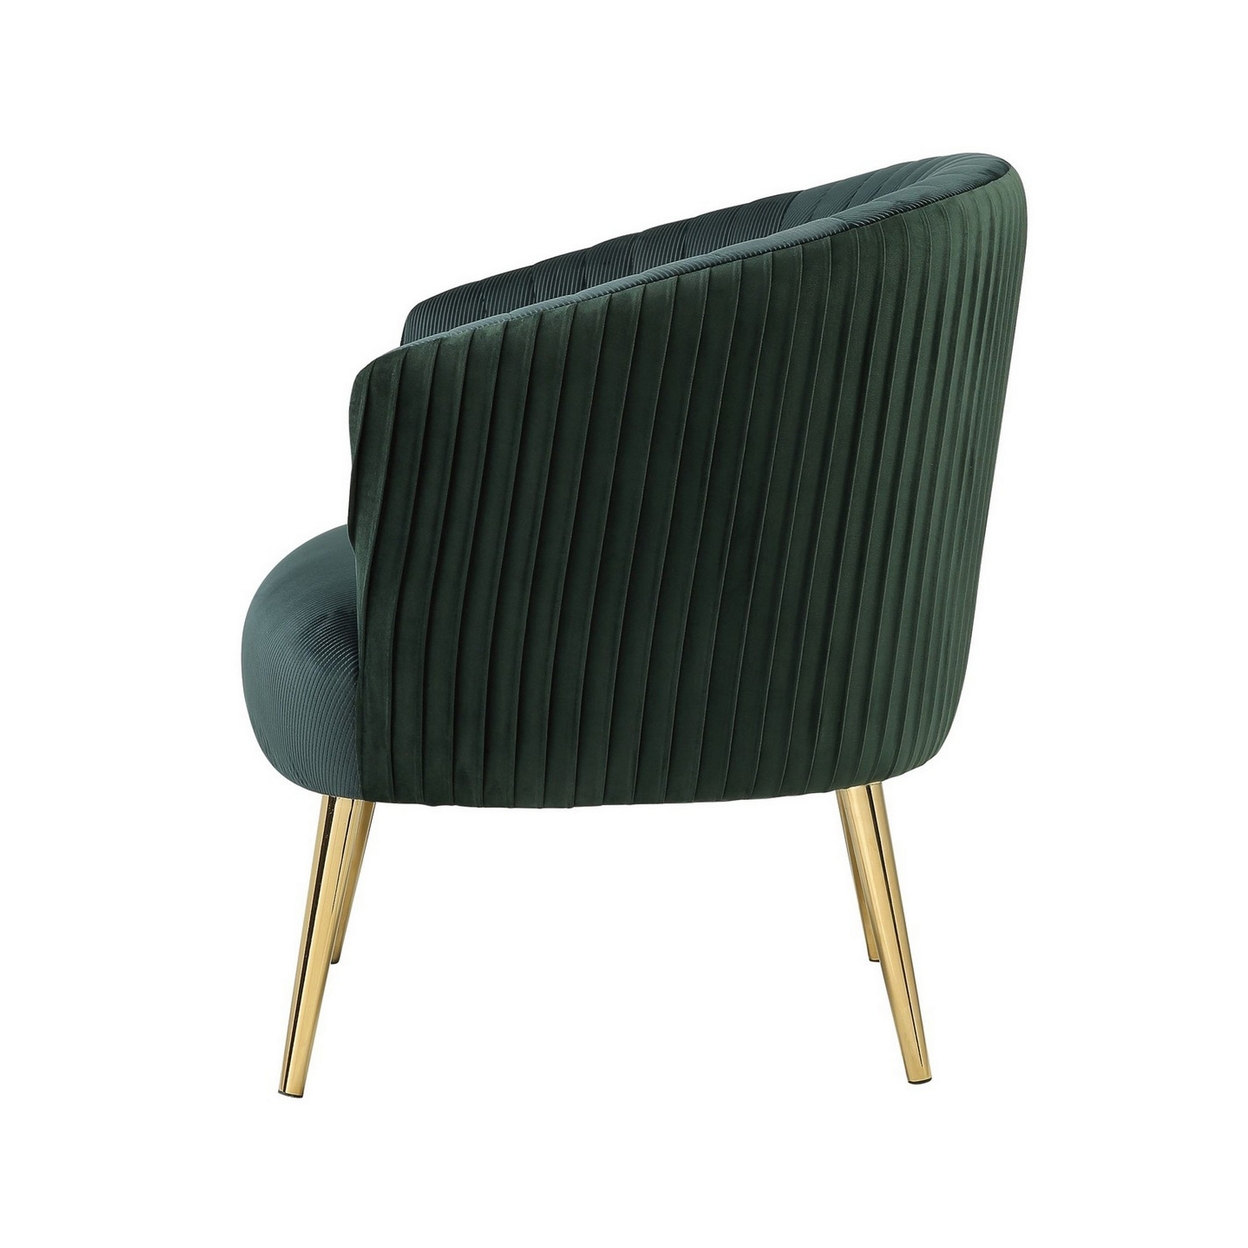 Accent Chair With Channel Stitching And Metal Legs, Green- Saltoro Sherpi